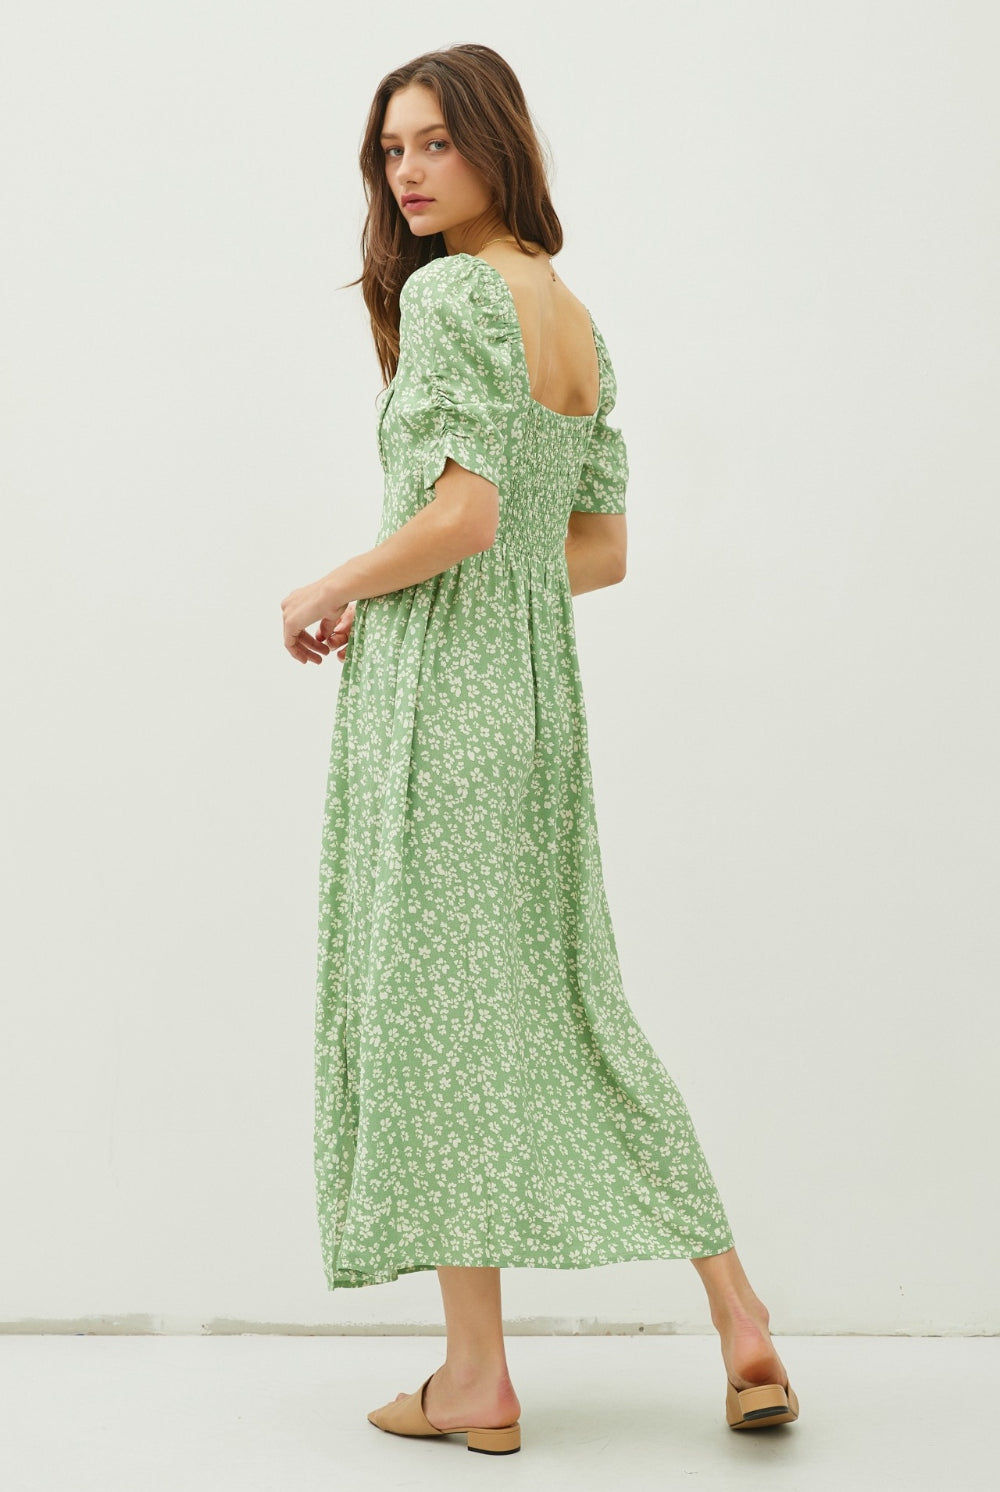 A poised woman exhibits a serene and romantic look in a sage green maxi dress with a delicate floral print and a tasteful back slit, perfect for spring and summer occasions.